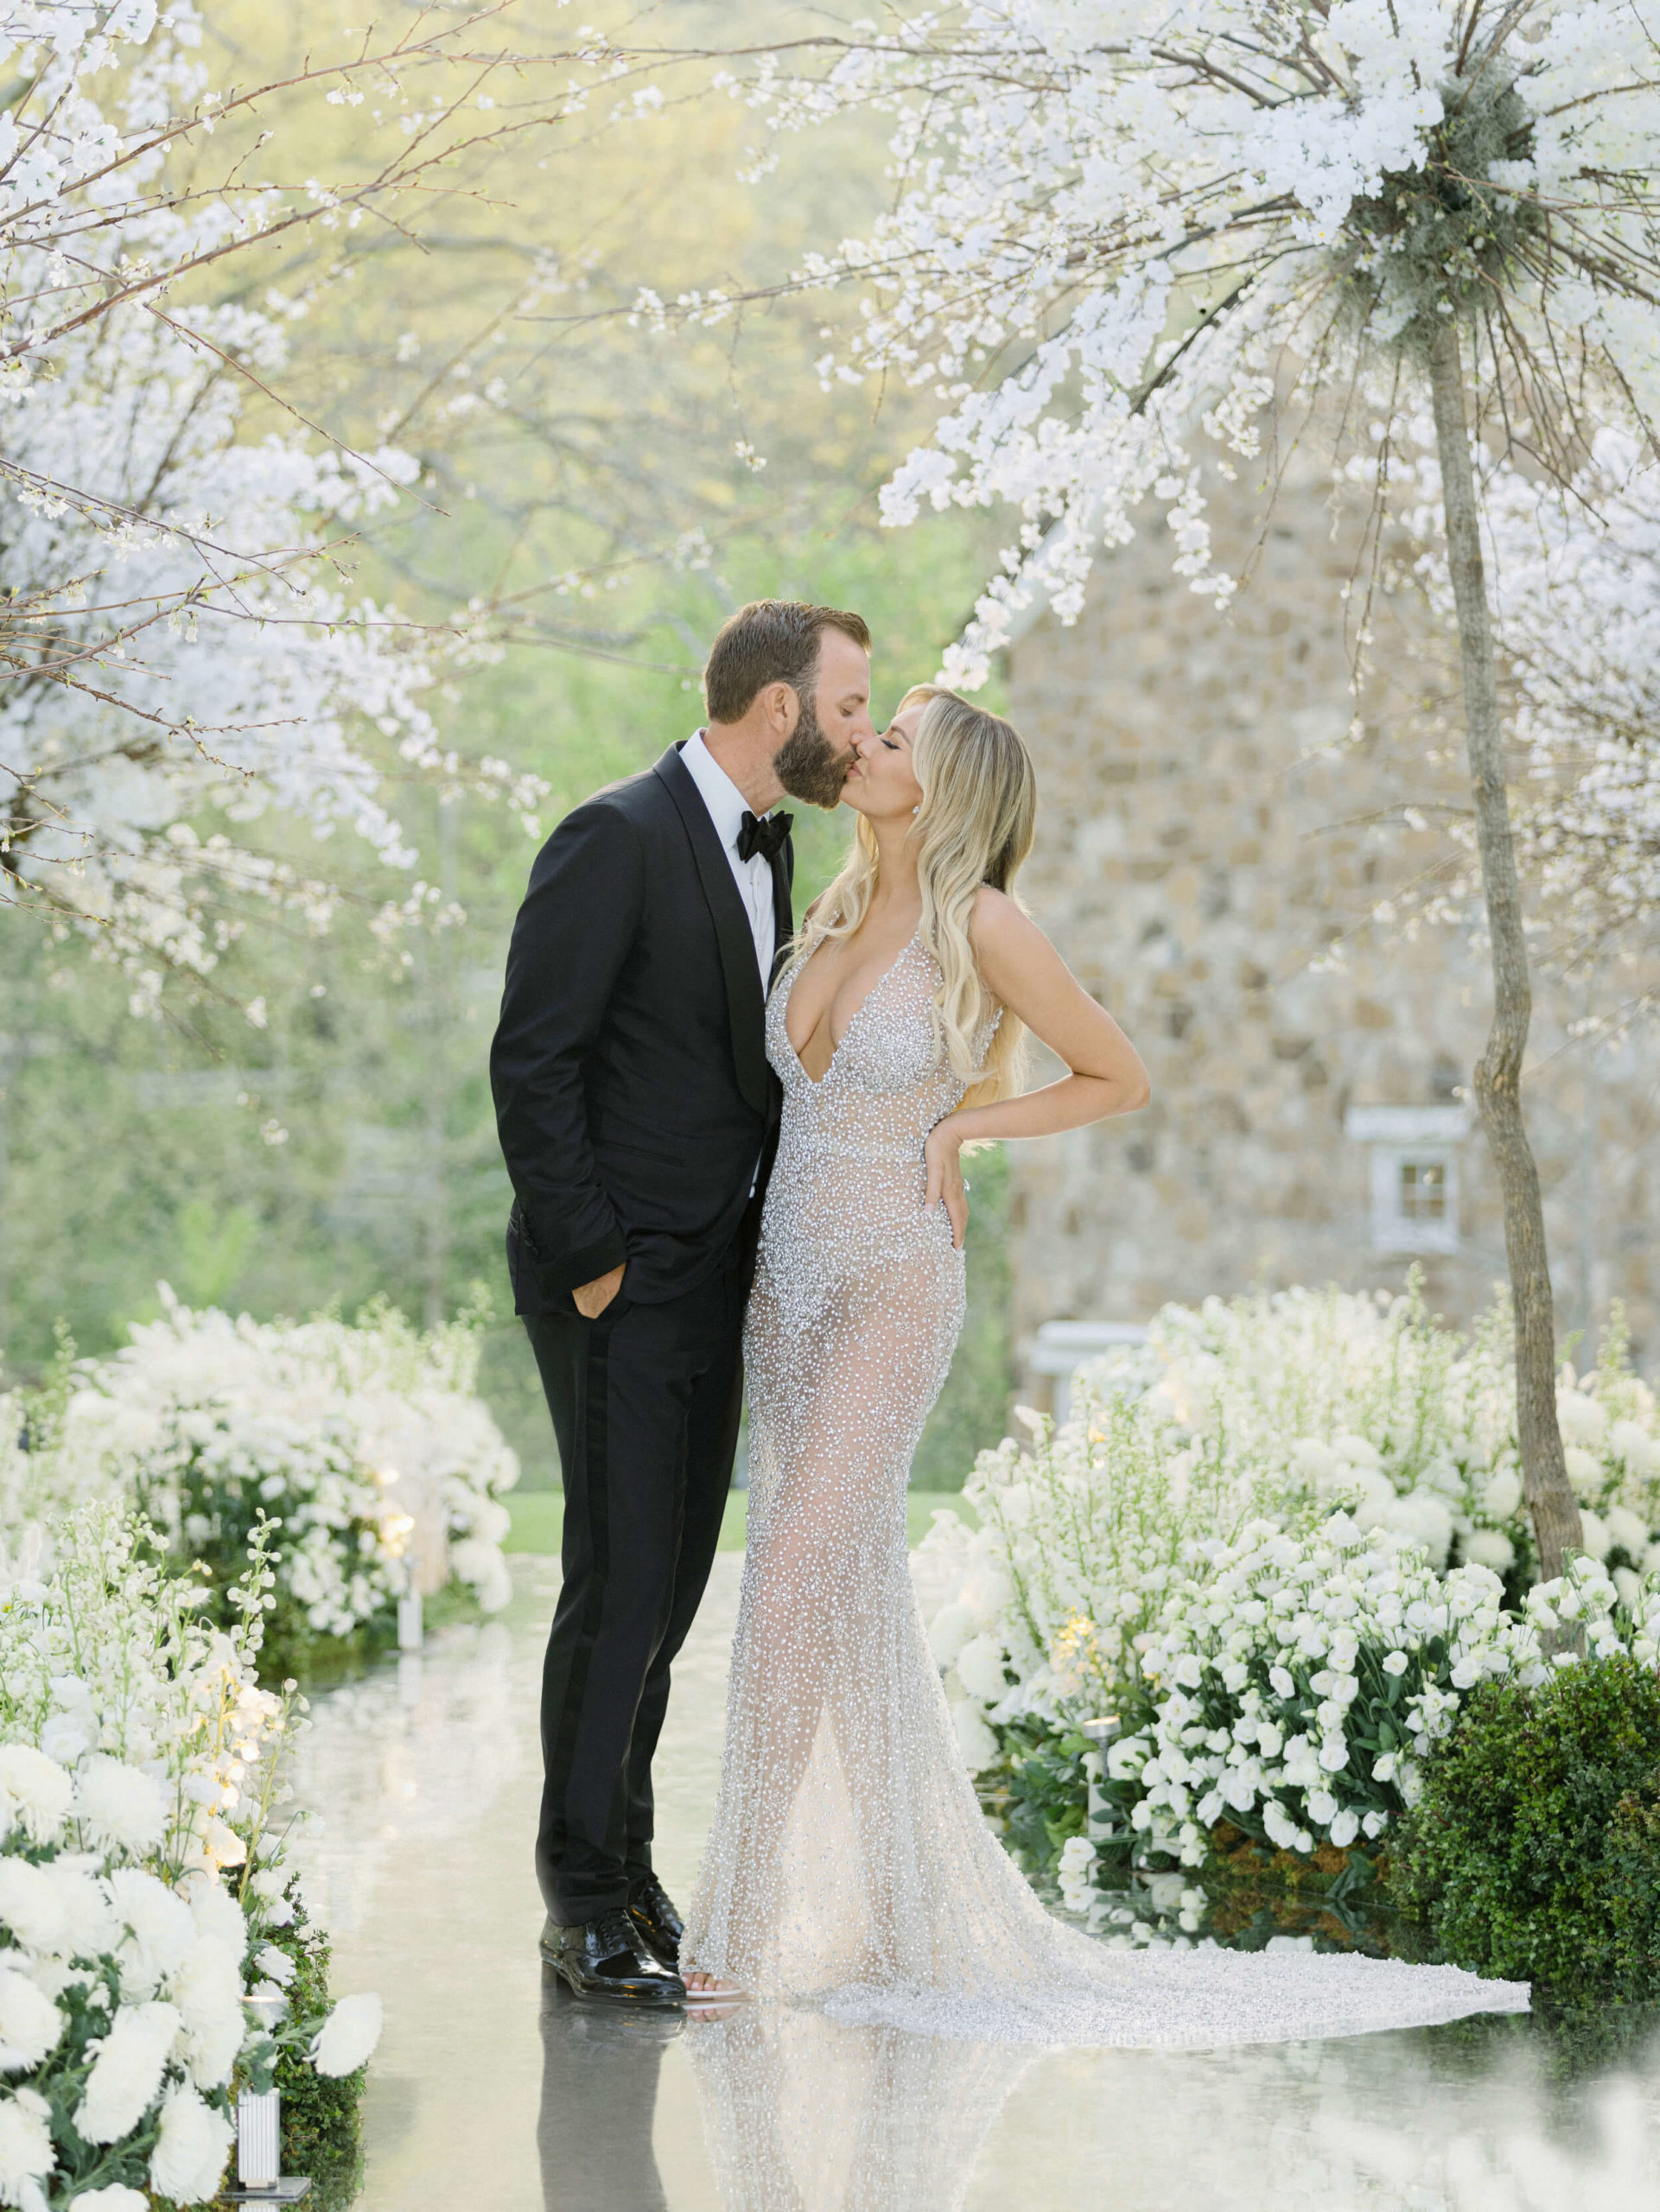 Paulina Gretzky and Dustin Johnson’s wedding at the luxe Blackberry Farm in Tennessee